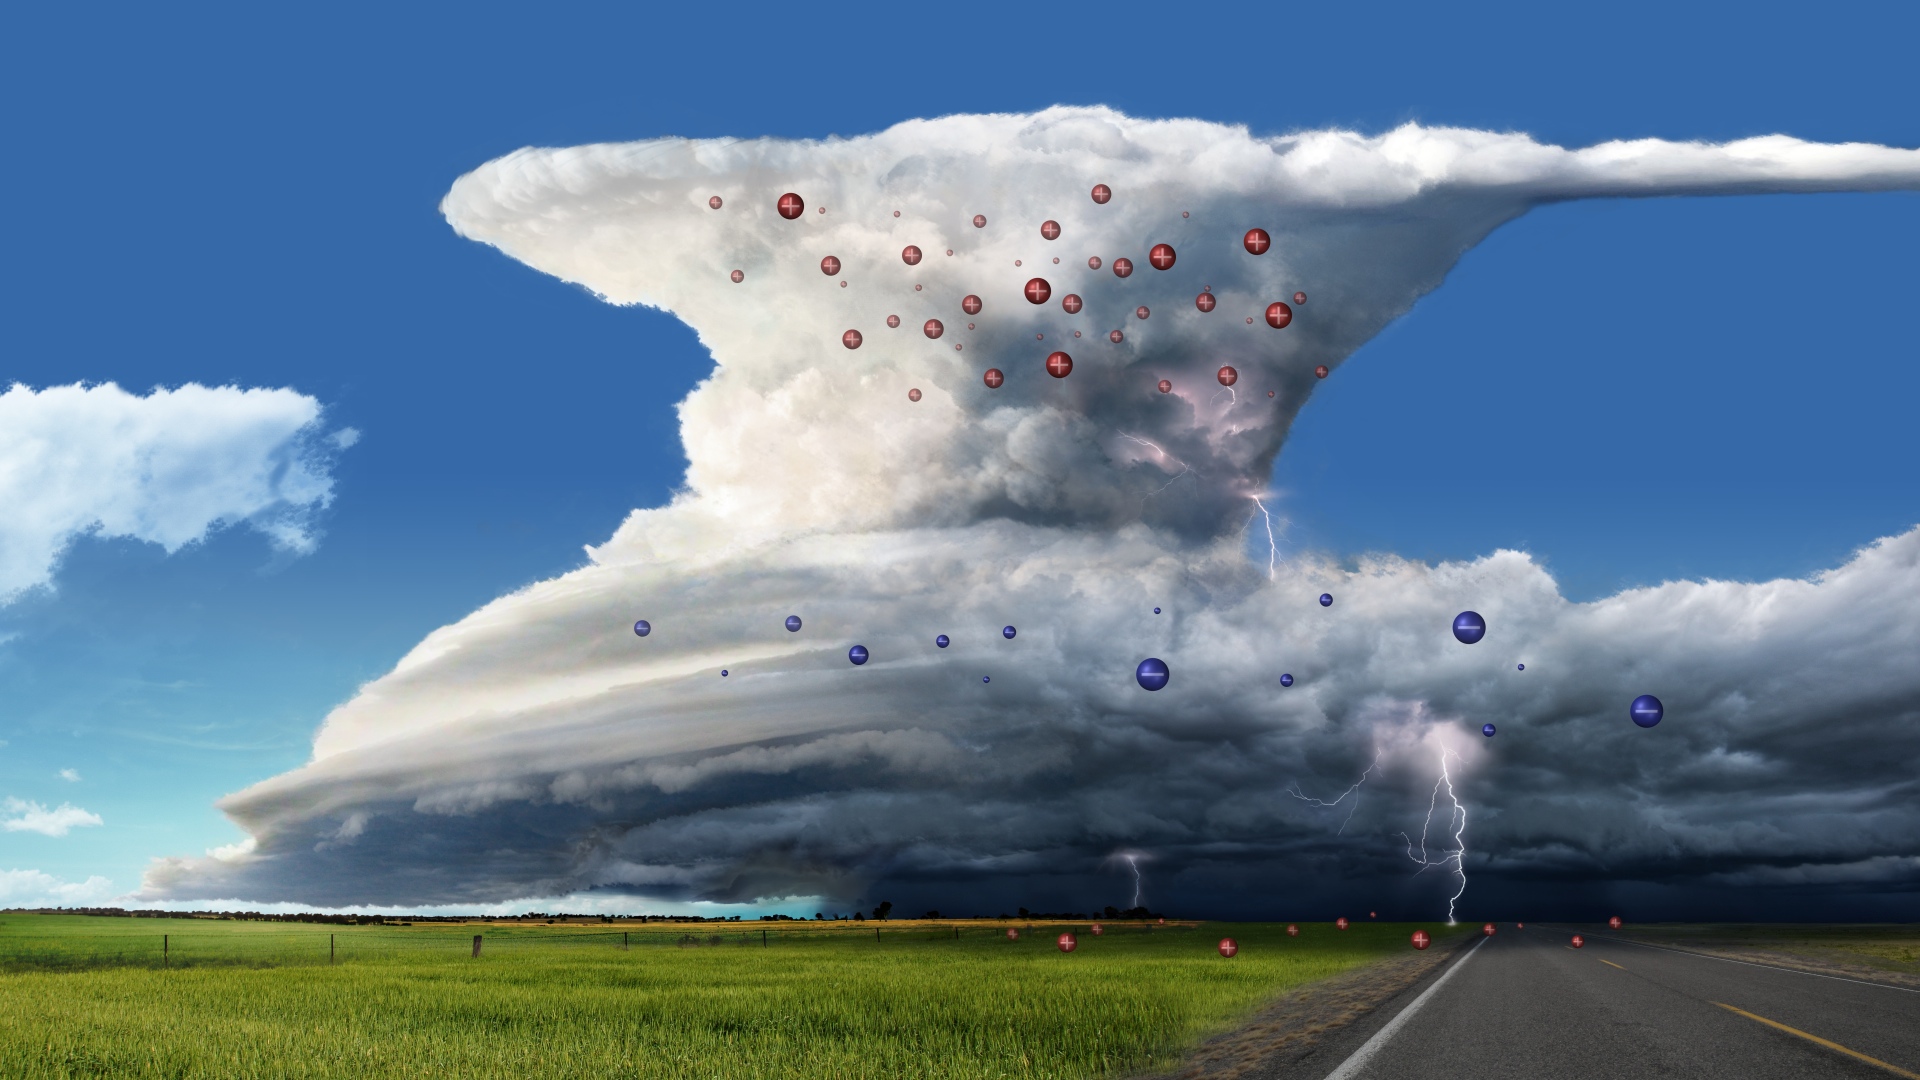 Preview Image for NASA's Fermi Helps Scientists Study Gamma-ray Thunderstorms